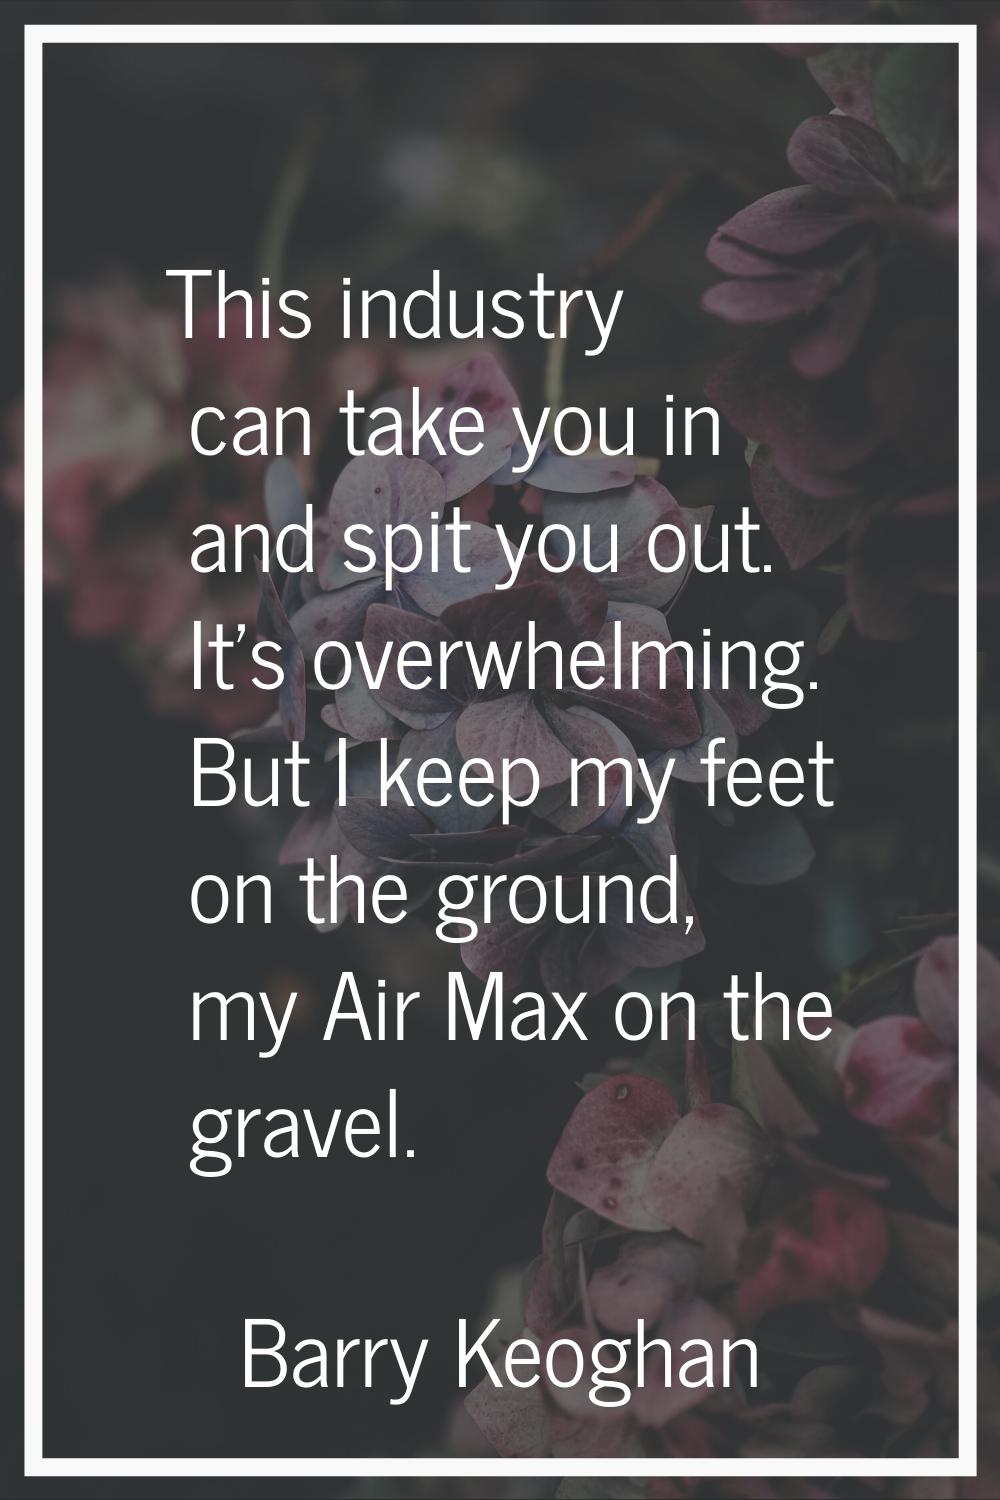 This industry can take you in and spit you out. It's overwhelming. But I keep my feet on the ground